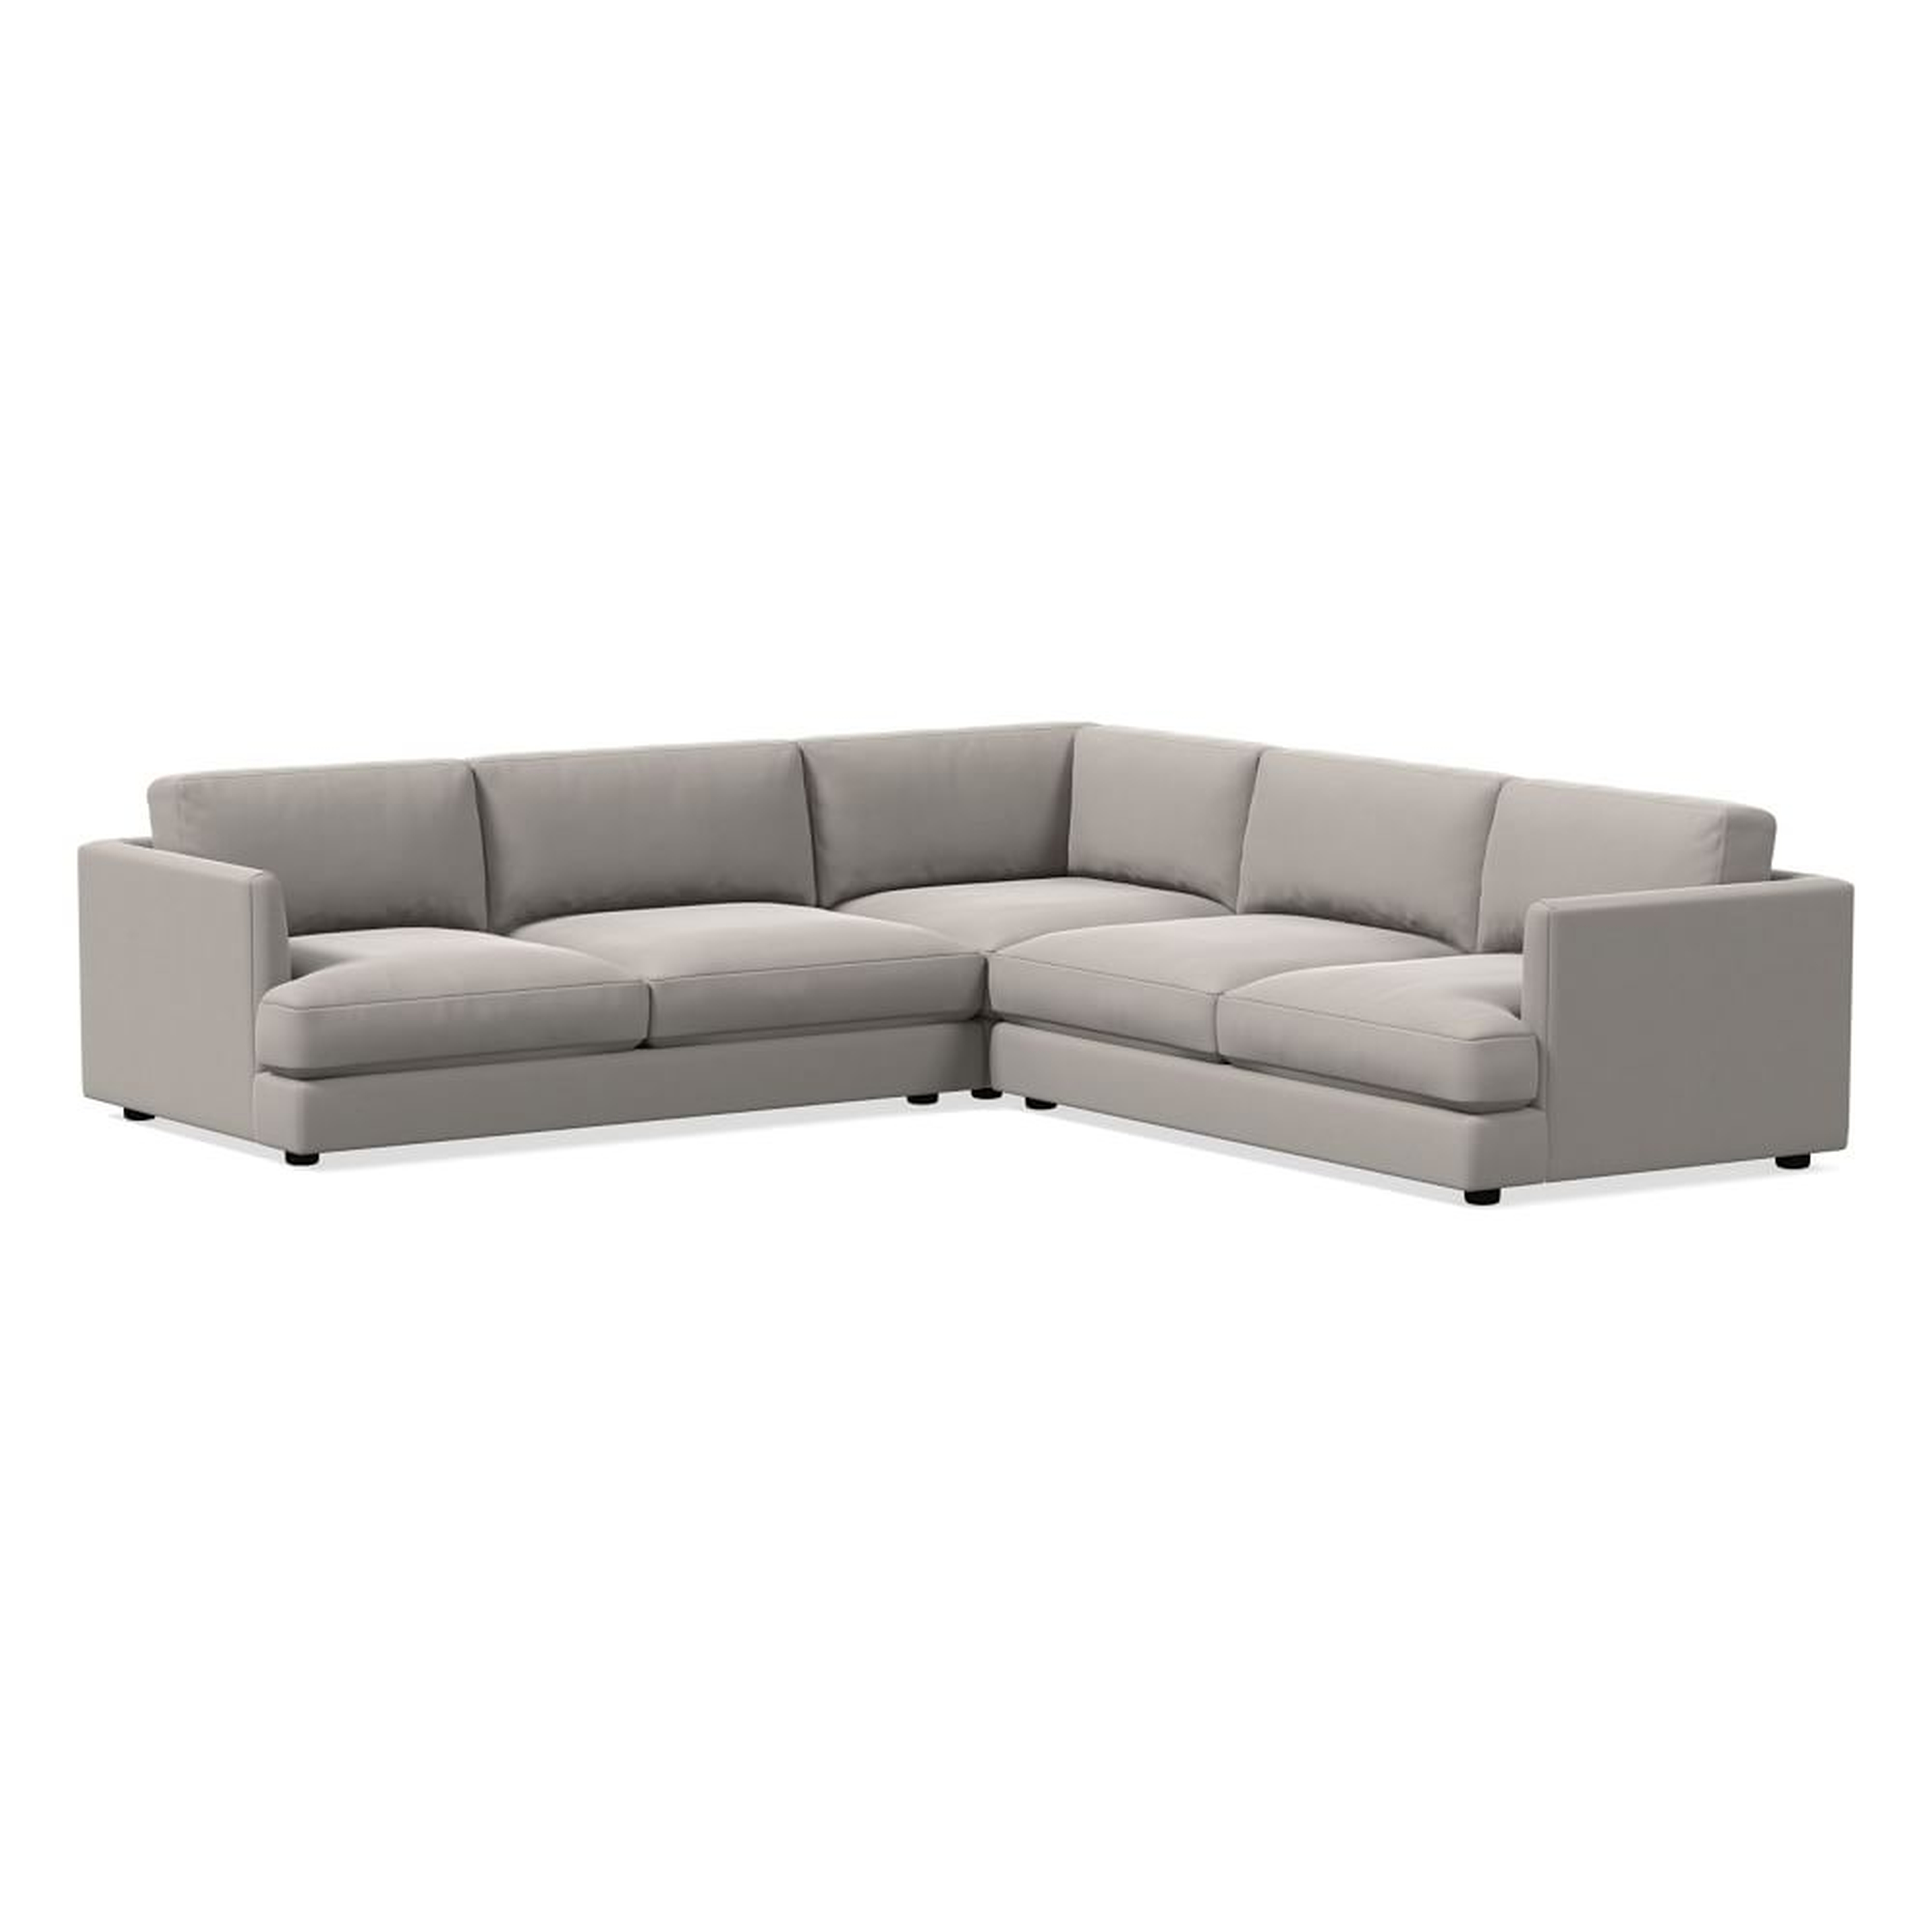 Haven Sectional Set 03: Left Arm Sofa, Corner, Right Arm Sofa, Poly, Performance Velvet, Silver, Concealed Supports - West Elm